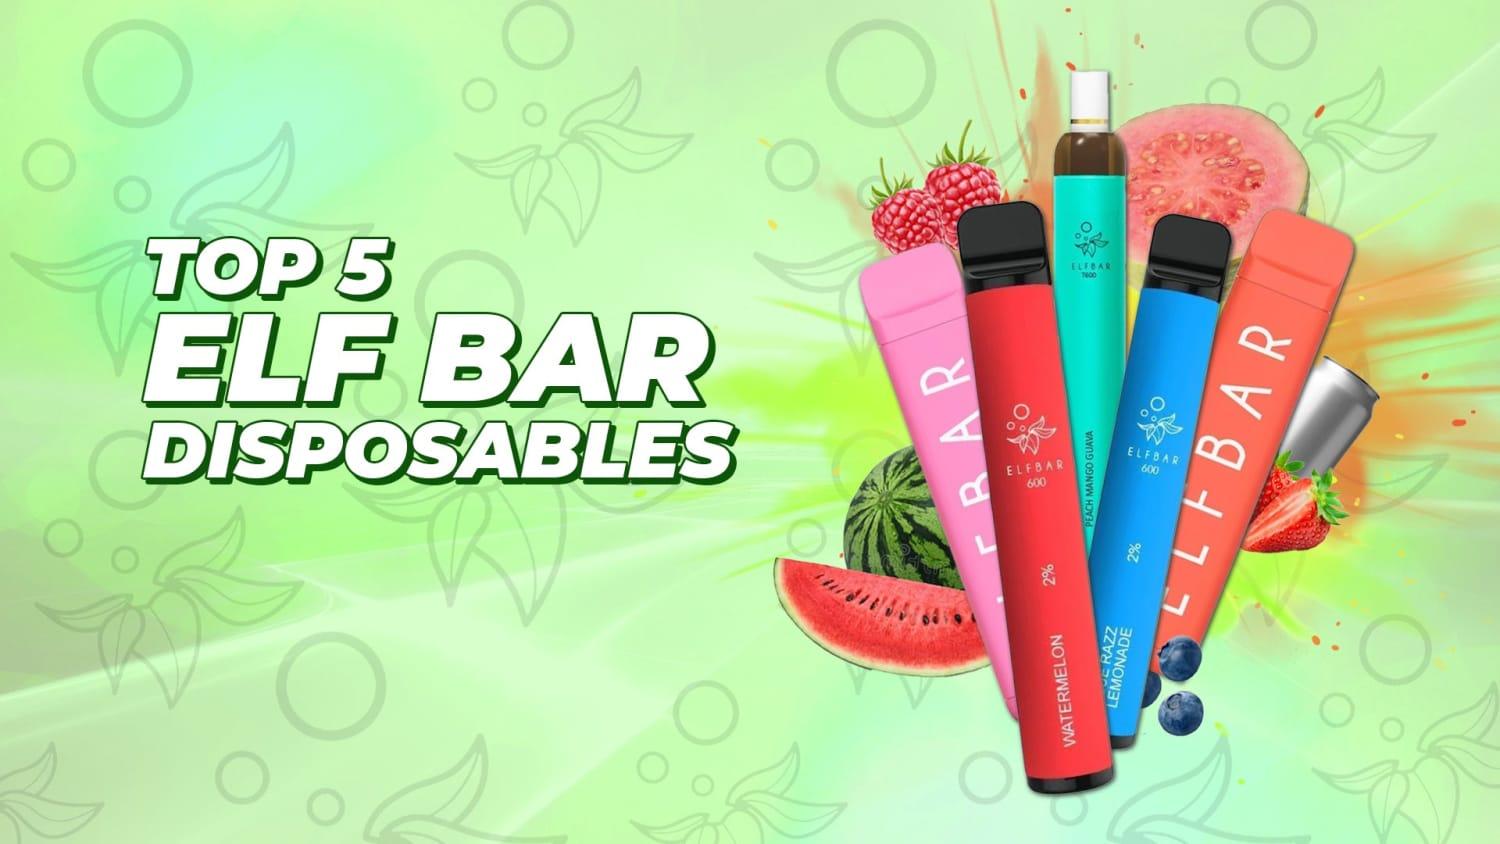 Top 5 Elf Bar Disposable Flavours - Brand:Elf Bar, Category:Vape Kits, Sub Category:Disposables